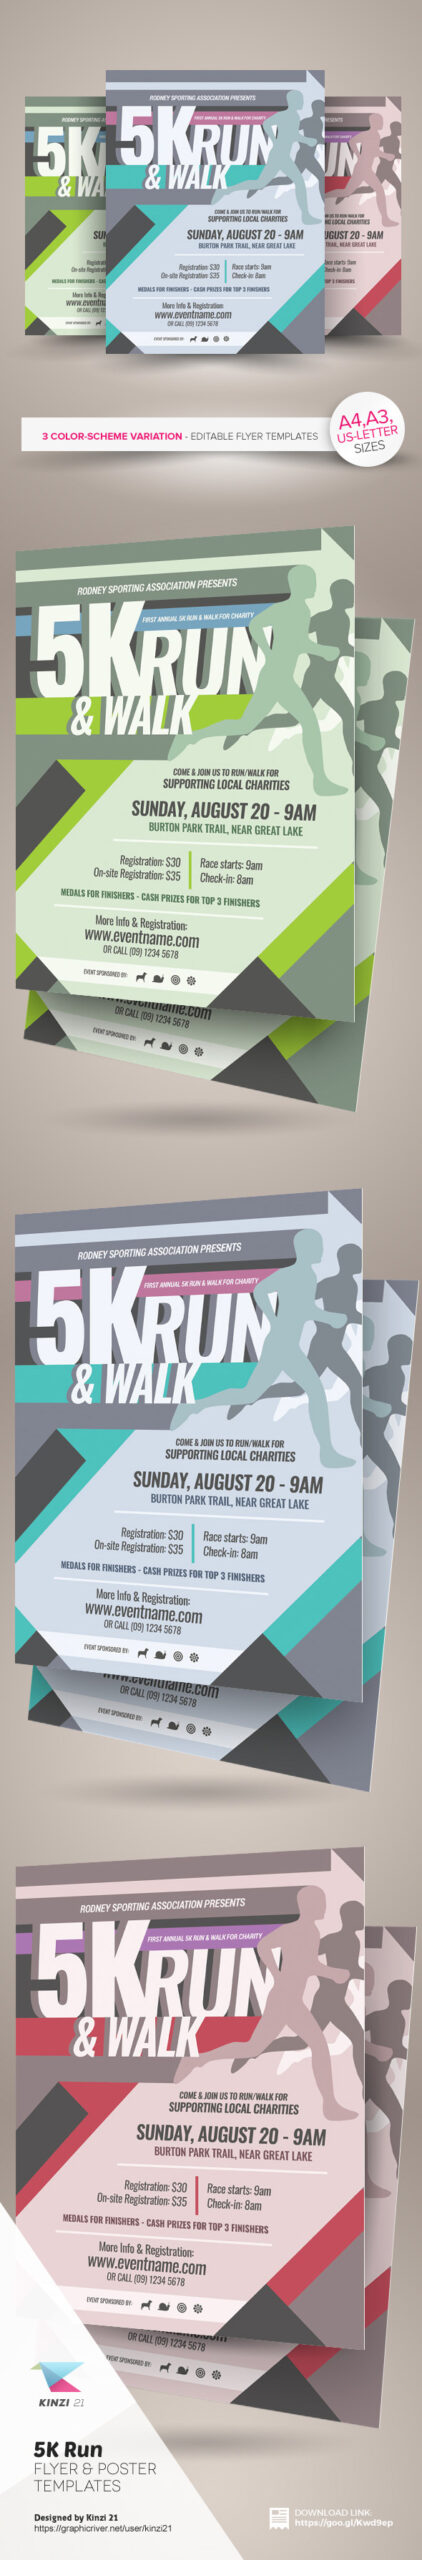 10K Run Flyer and Poster Templates on Behance Throughout 5K Run Flyer Template Within 5K Run Flyer Template